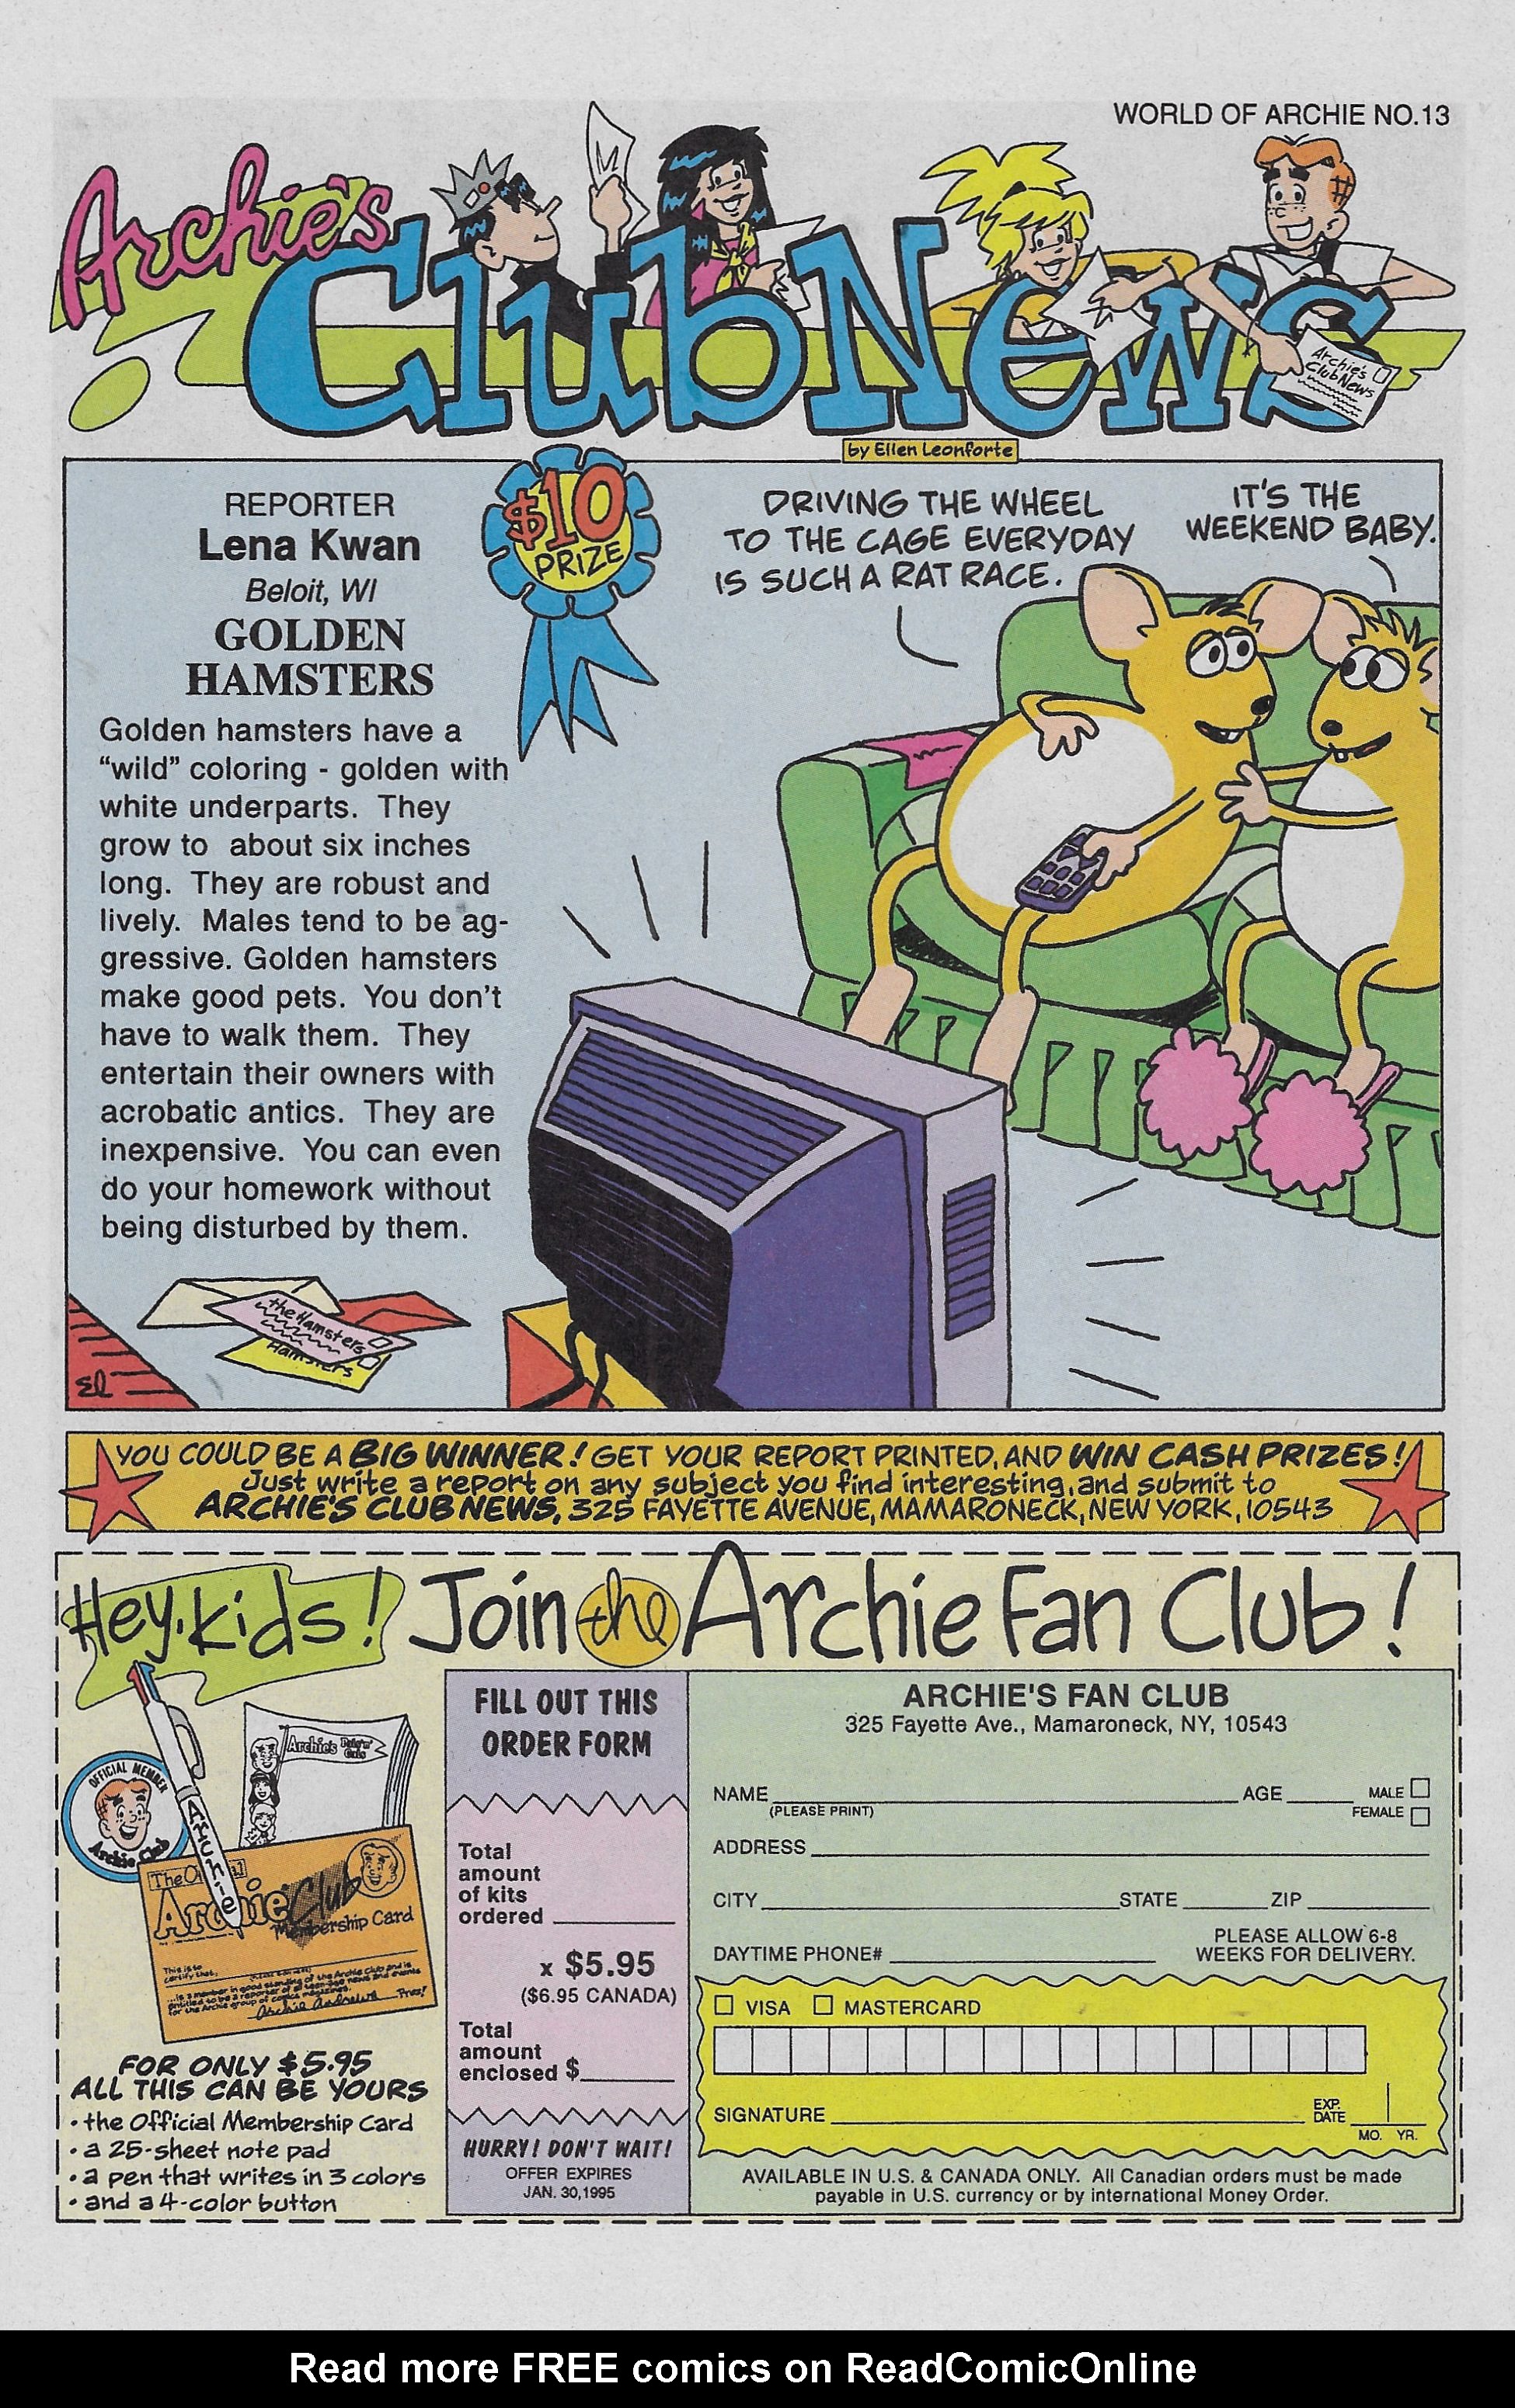 Read online World of Archie comic -  Issue #13 - 10